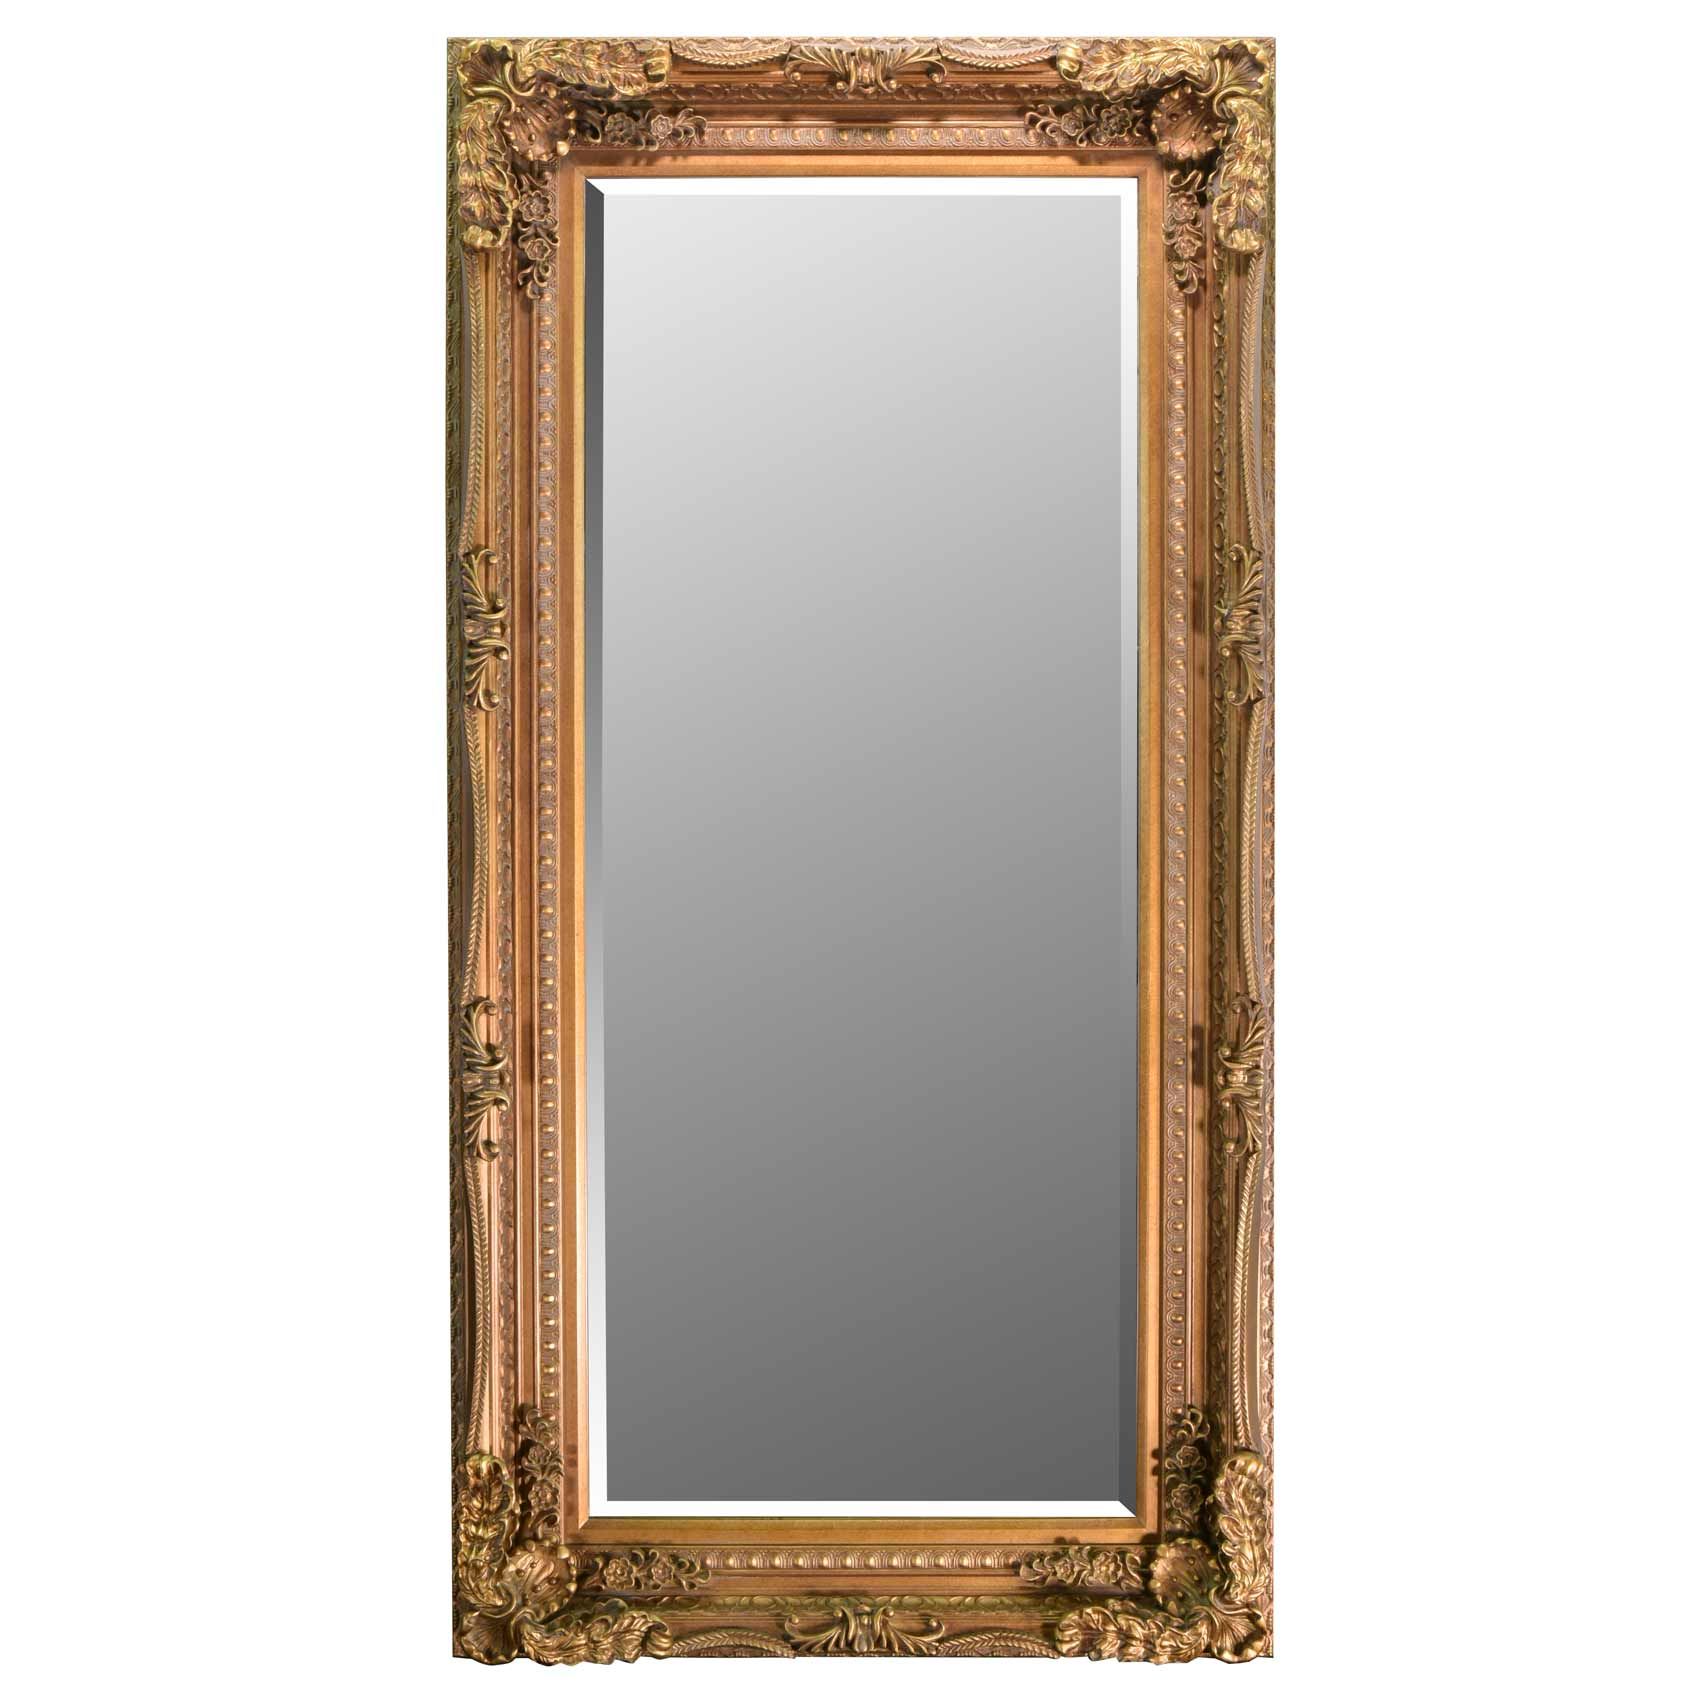 Large Lois Leaner Antique Full Length Gold Wall Mirror 5Ft9 X 2Ft11 Intended For Ultra Brushed Gold Rectangular Framed Wall Mirrors (View 9 of 15)